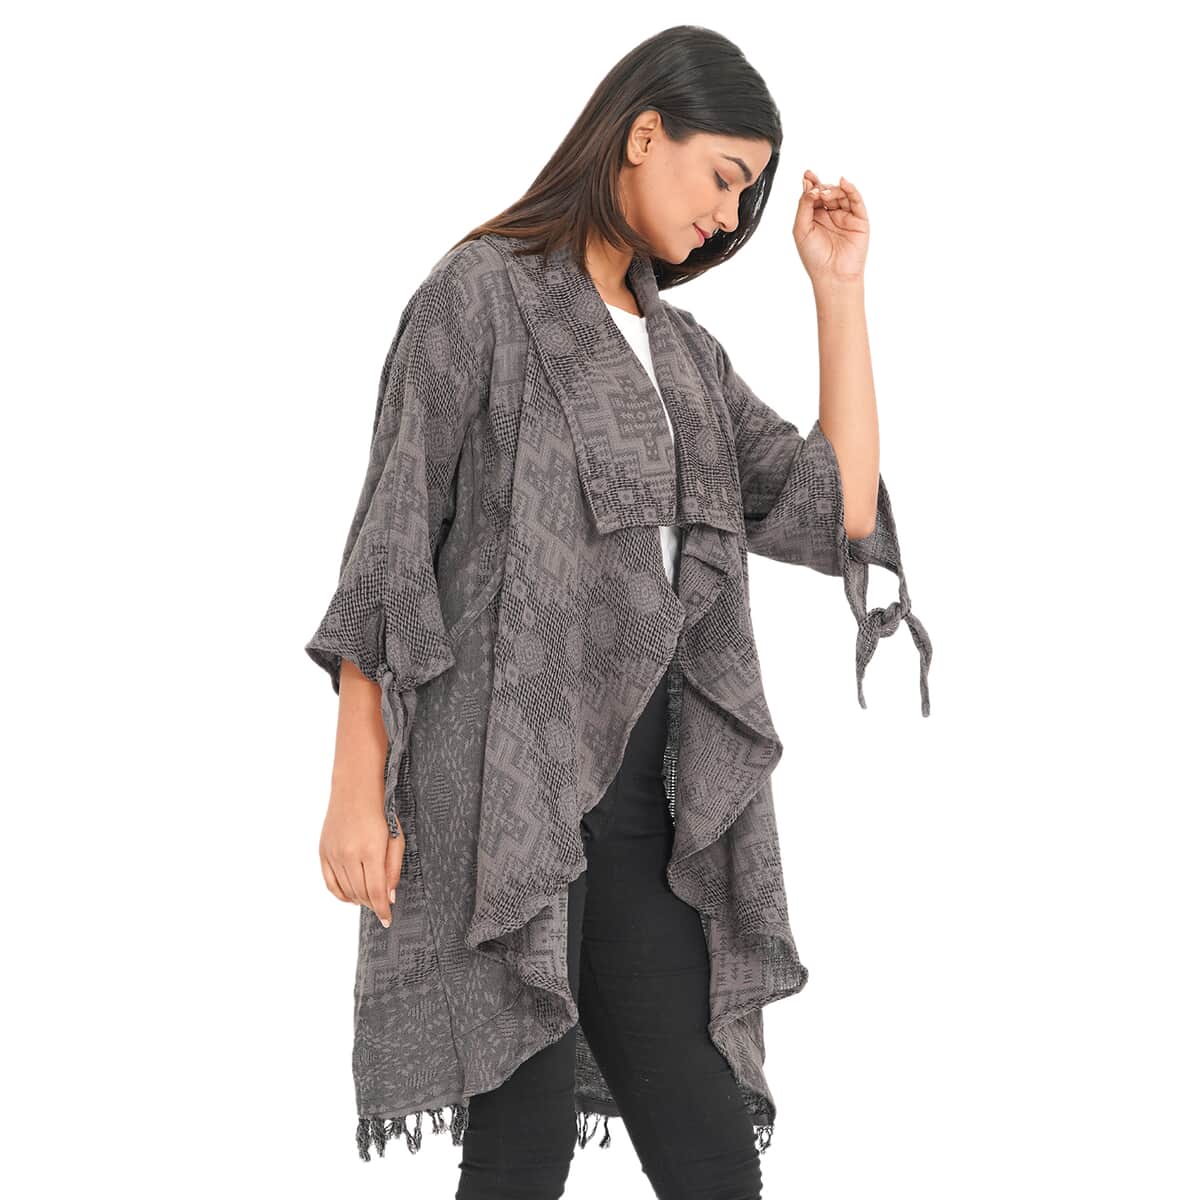 Passage Gray 100% Cotton Double Layer Jacquard Front Waterfall Cardigan - One size Missy, Cotton Cardigan, Women Cardigan, Maxi Cardigan, Summer Cardigan image number 3